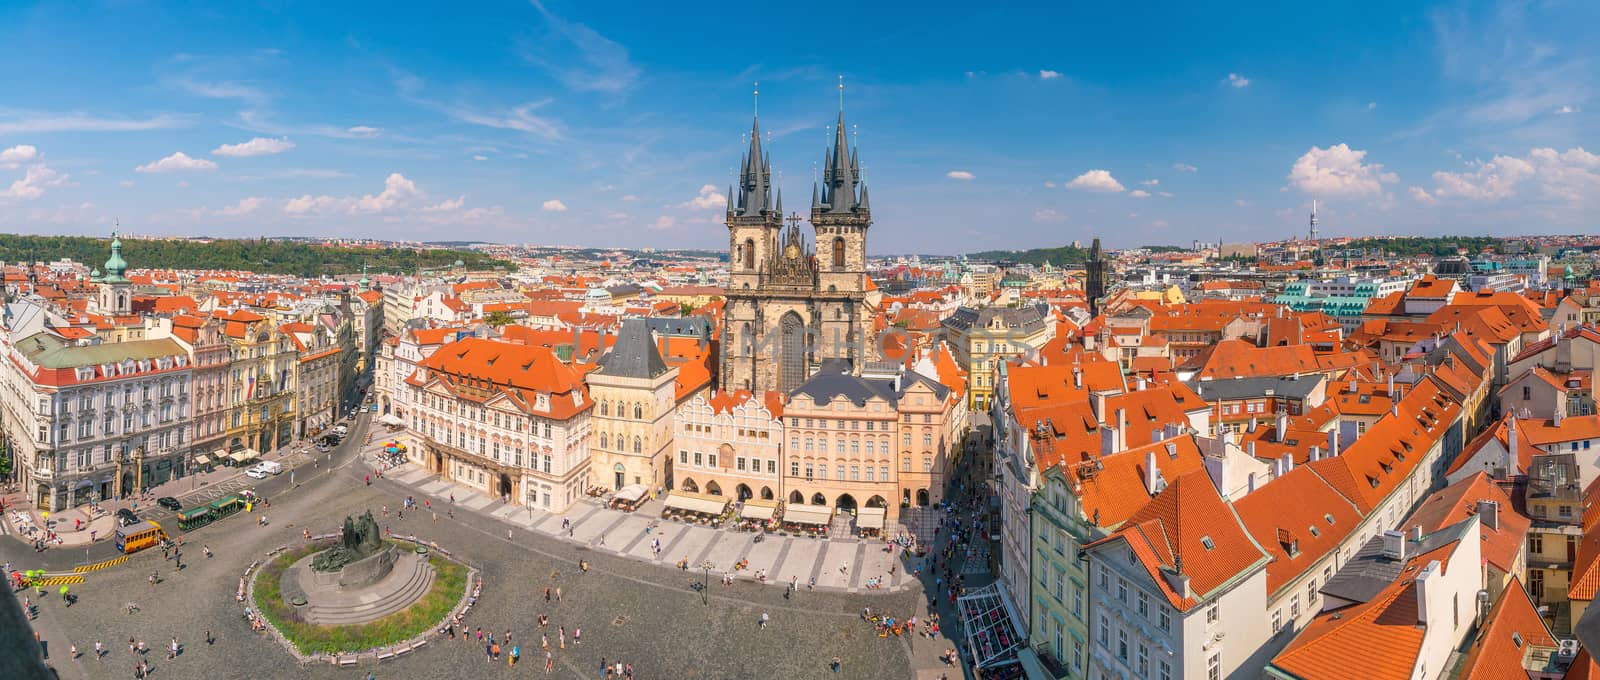 Old Town square with Tyn Church, Prague, Czech Republic by f11photo